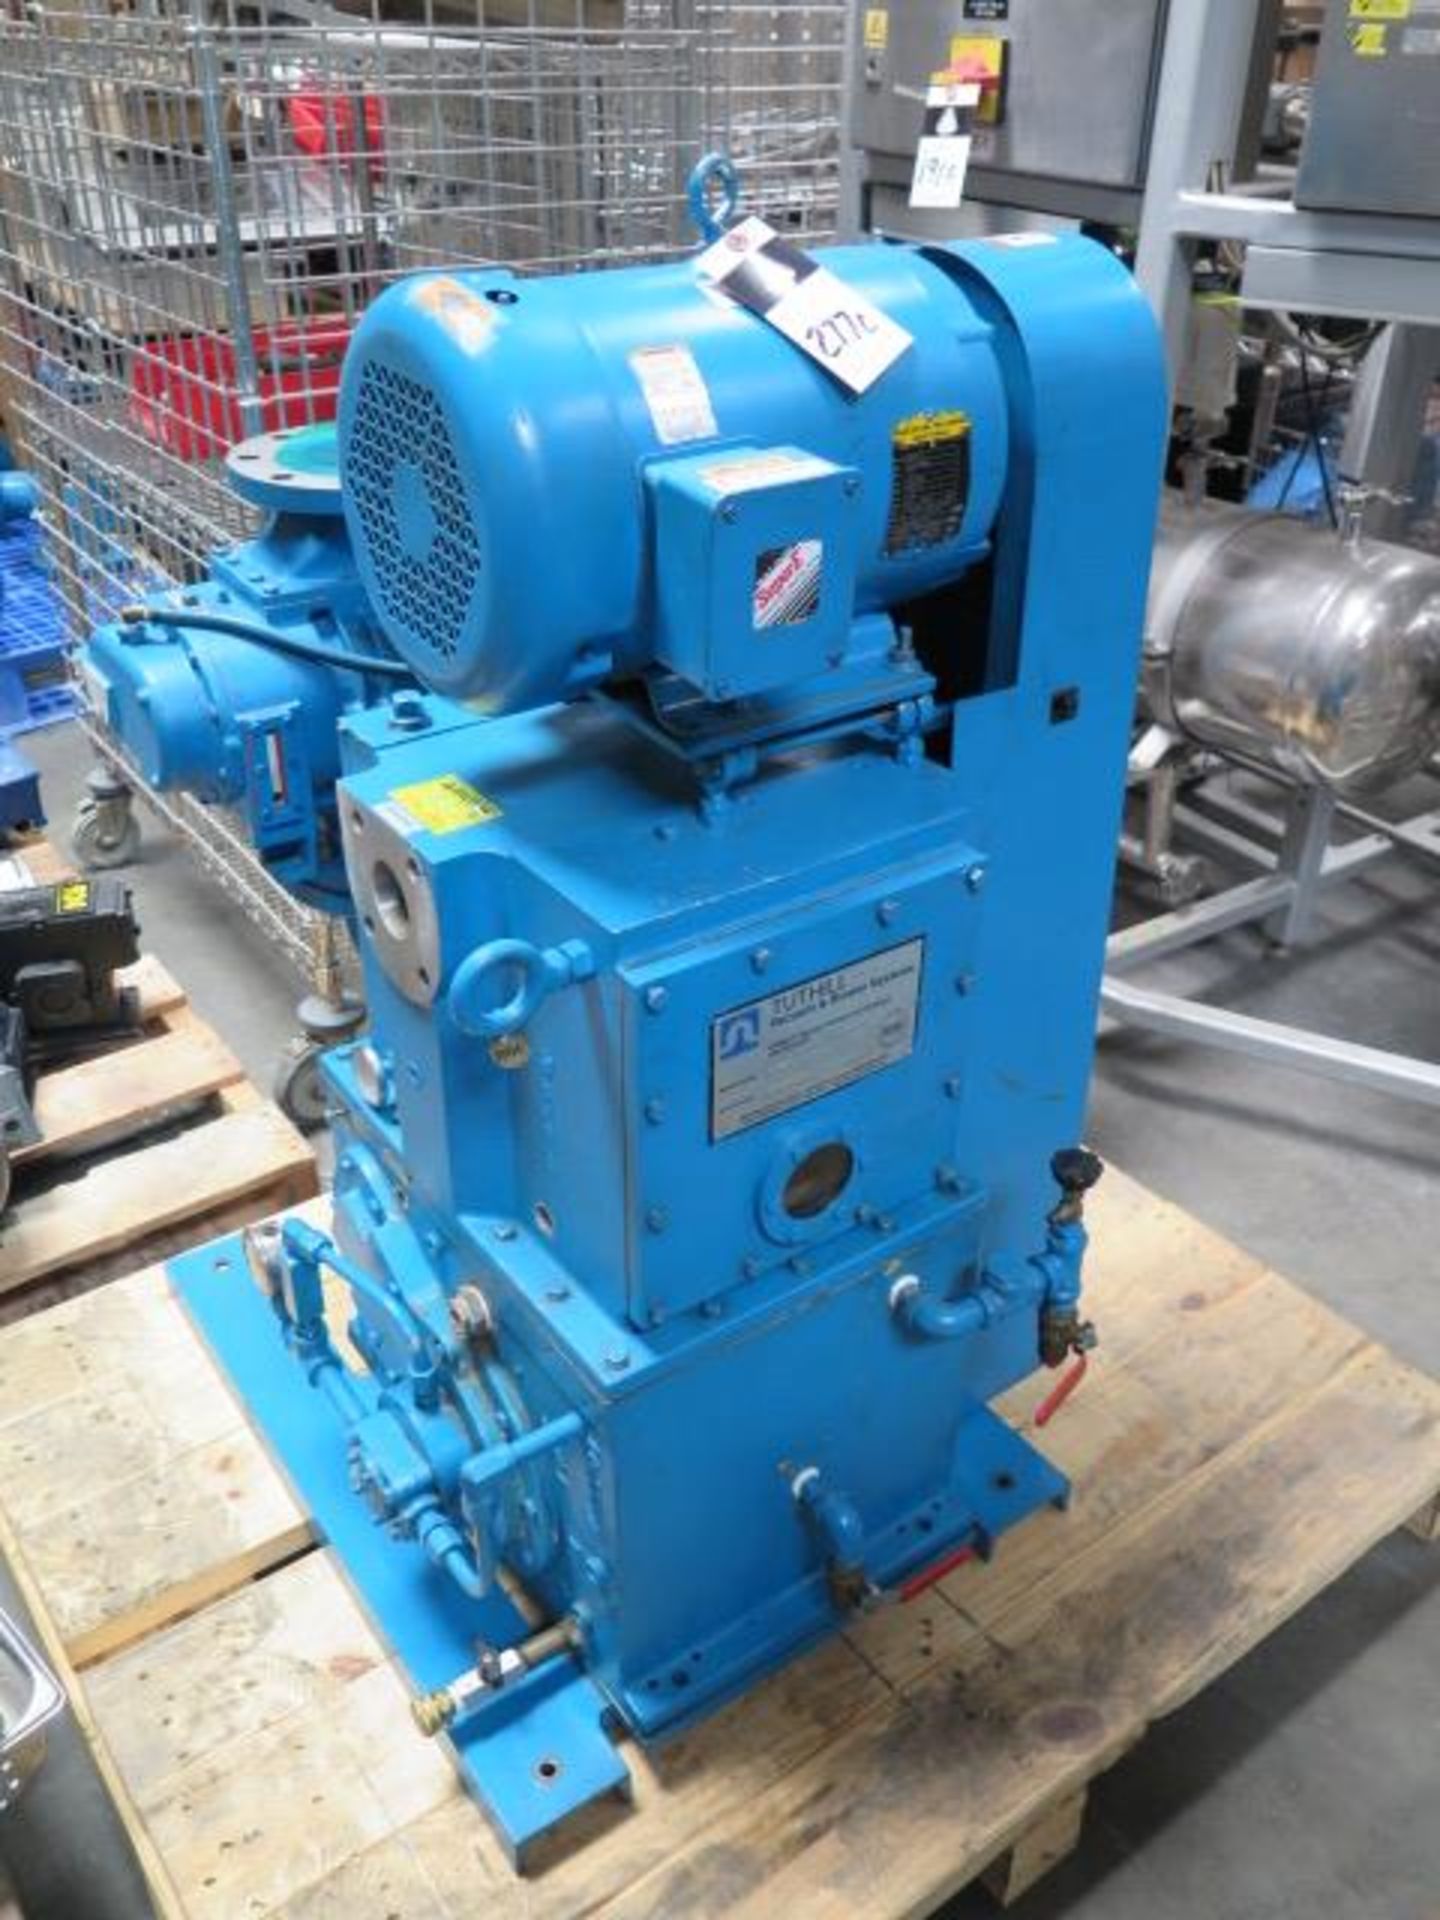 Kinney / Tuthill KT150C Vacuum Pump w/ 7.5Hp Motor, 3Hp Suction Motor (SOLD AS-IS - NO WARRANTY) - Image 2 of 7